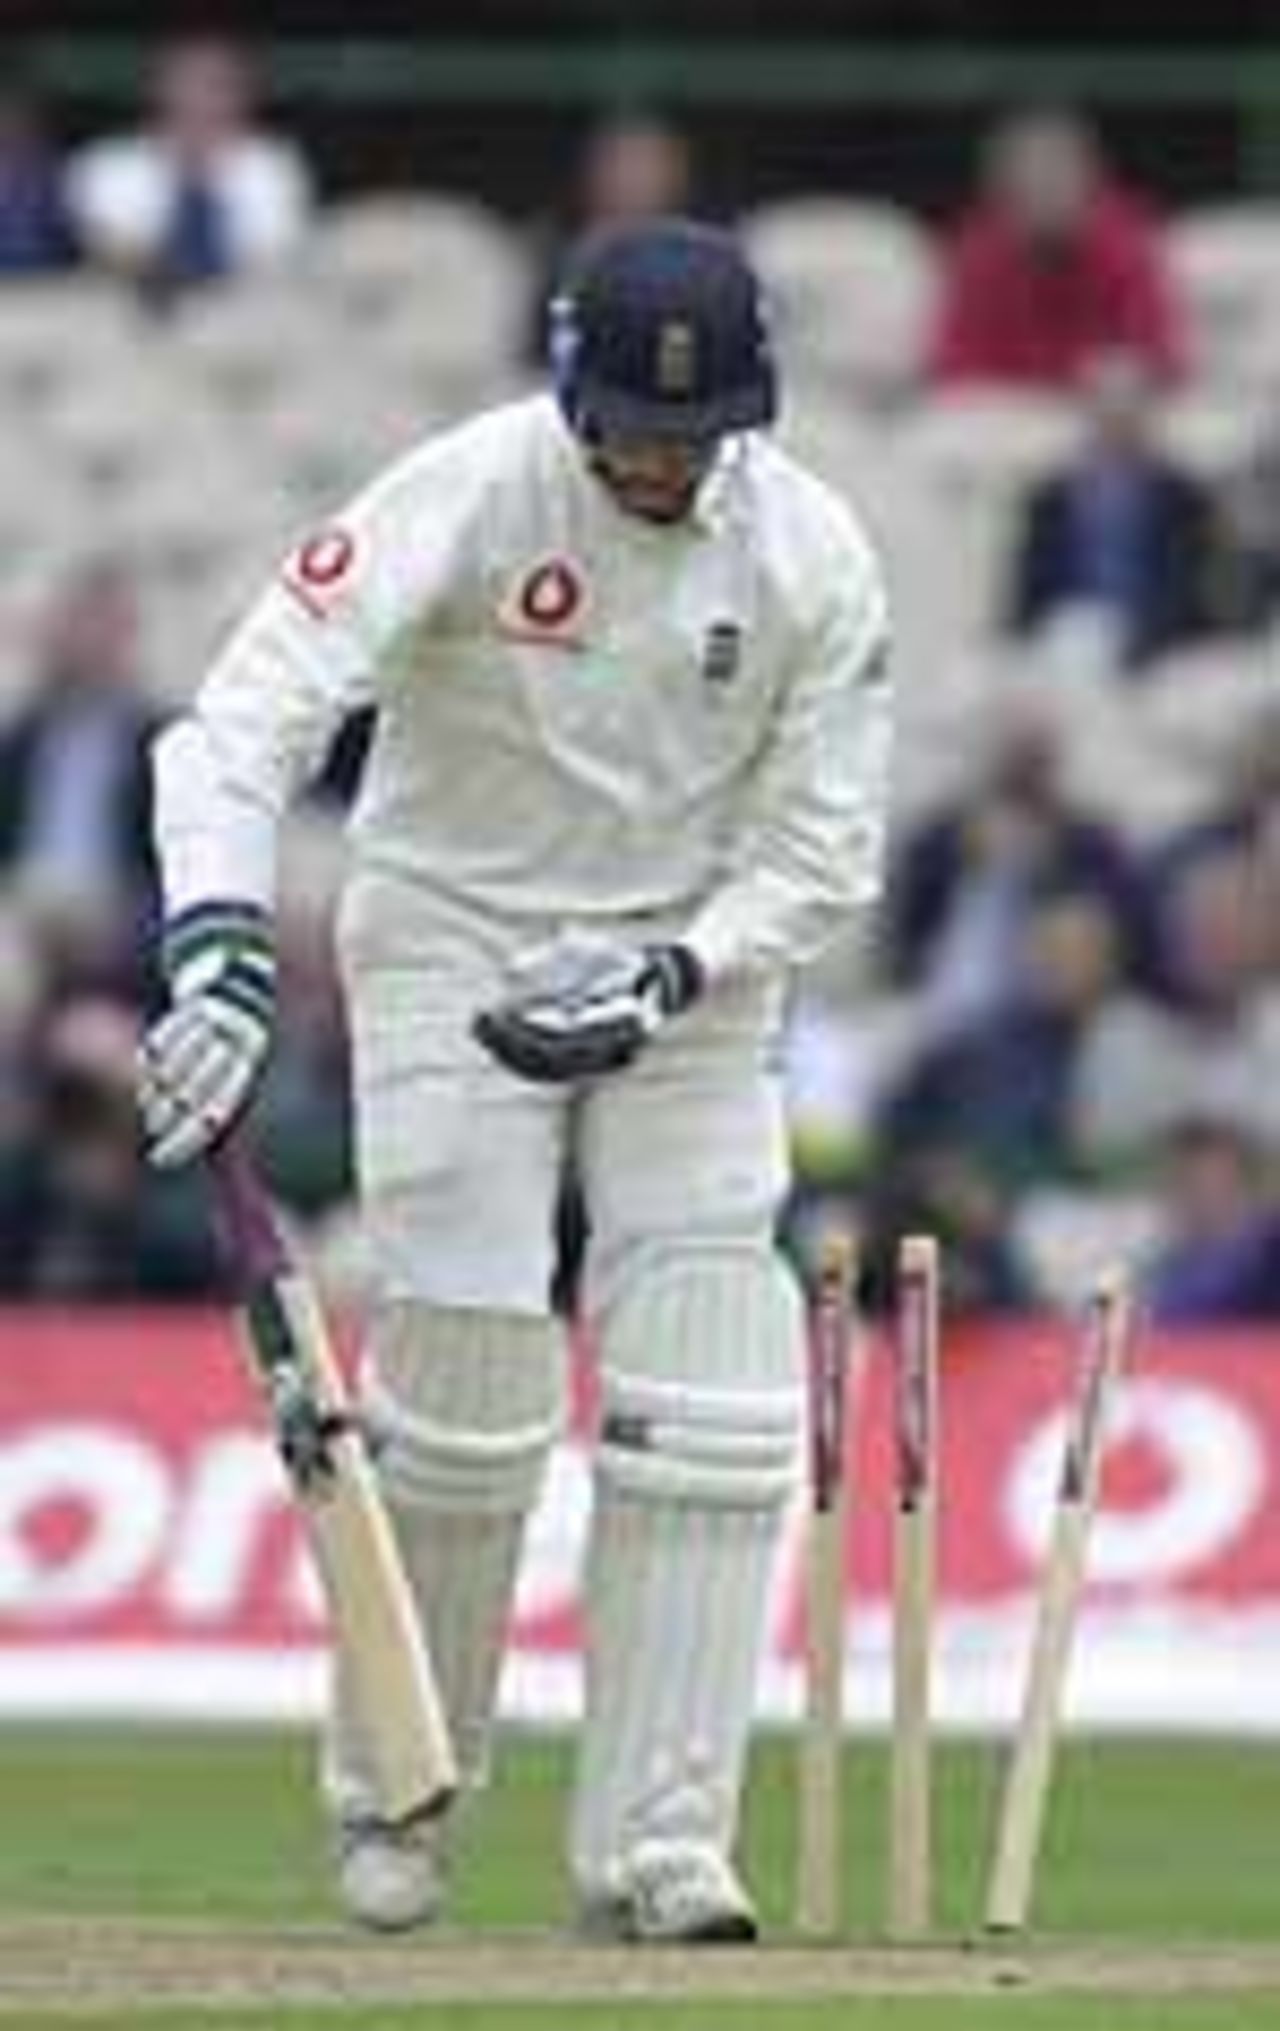 Marcus Trescothick is bowled by Akram